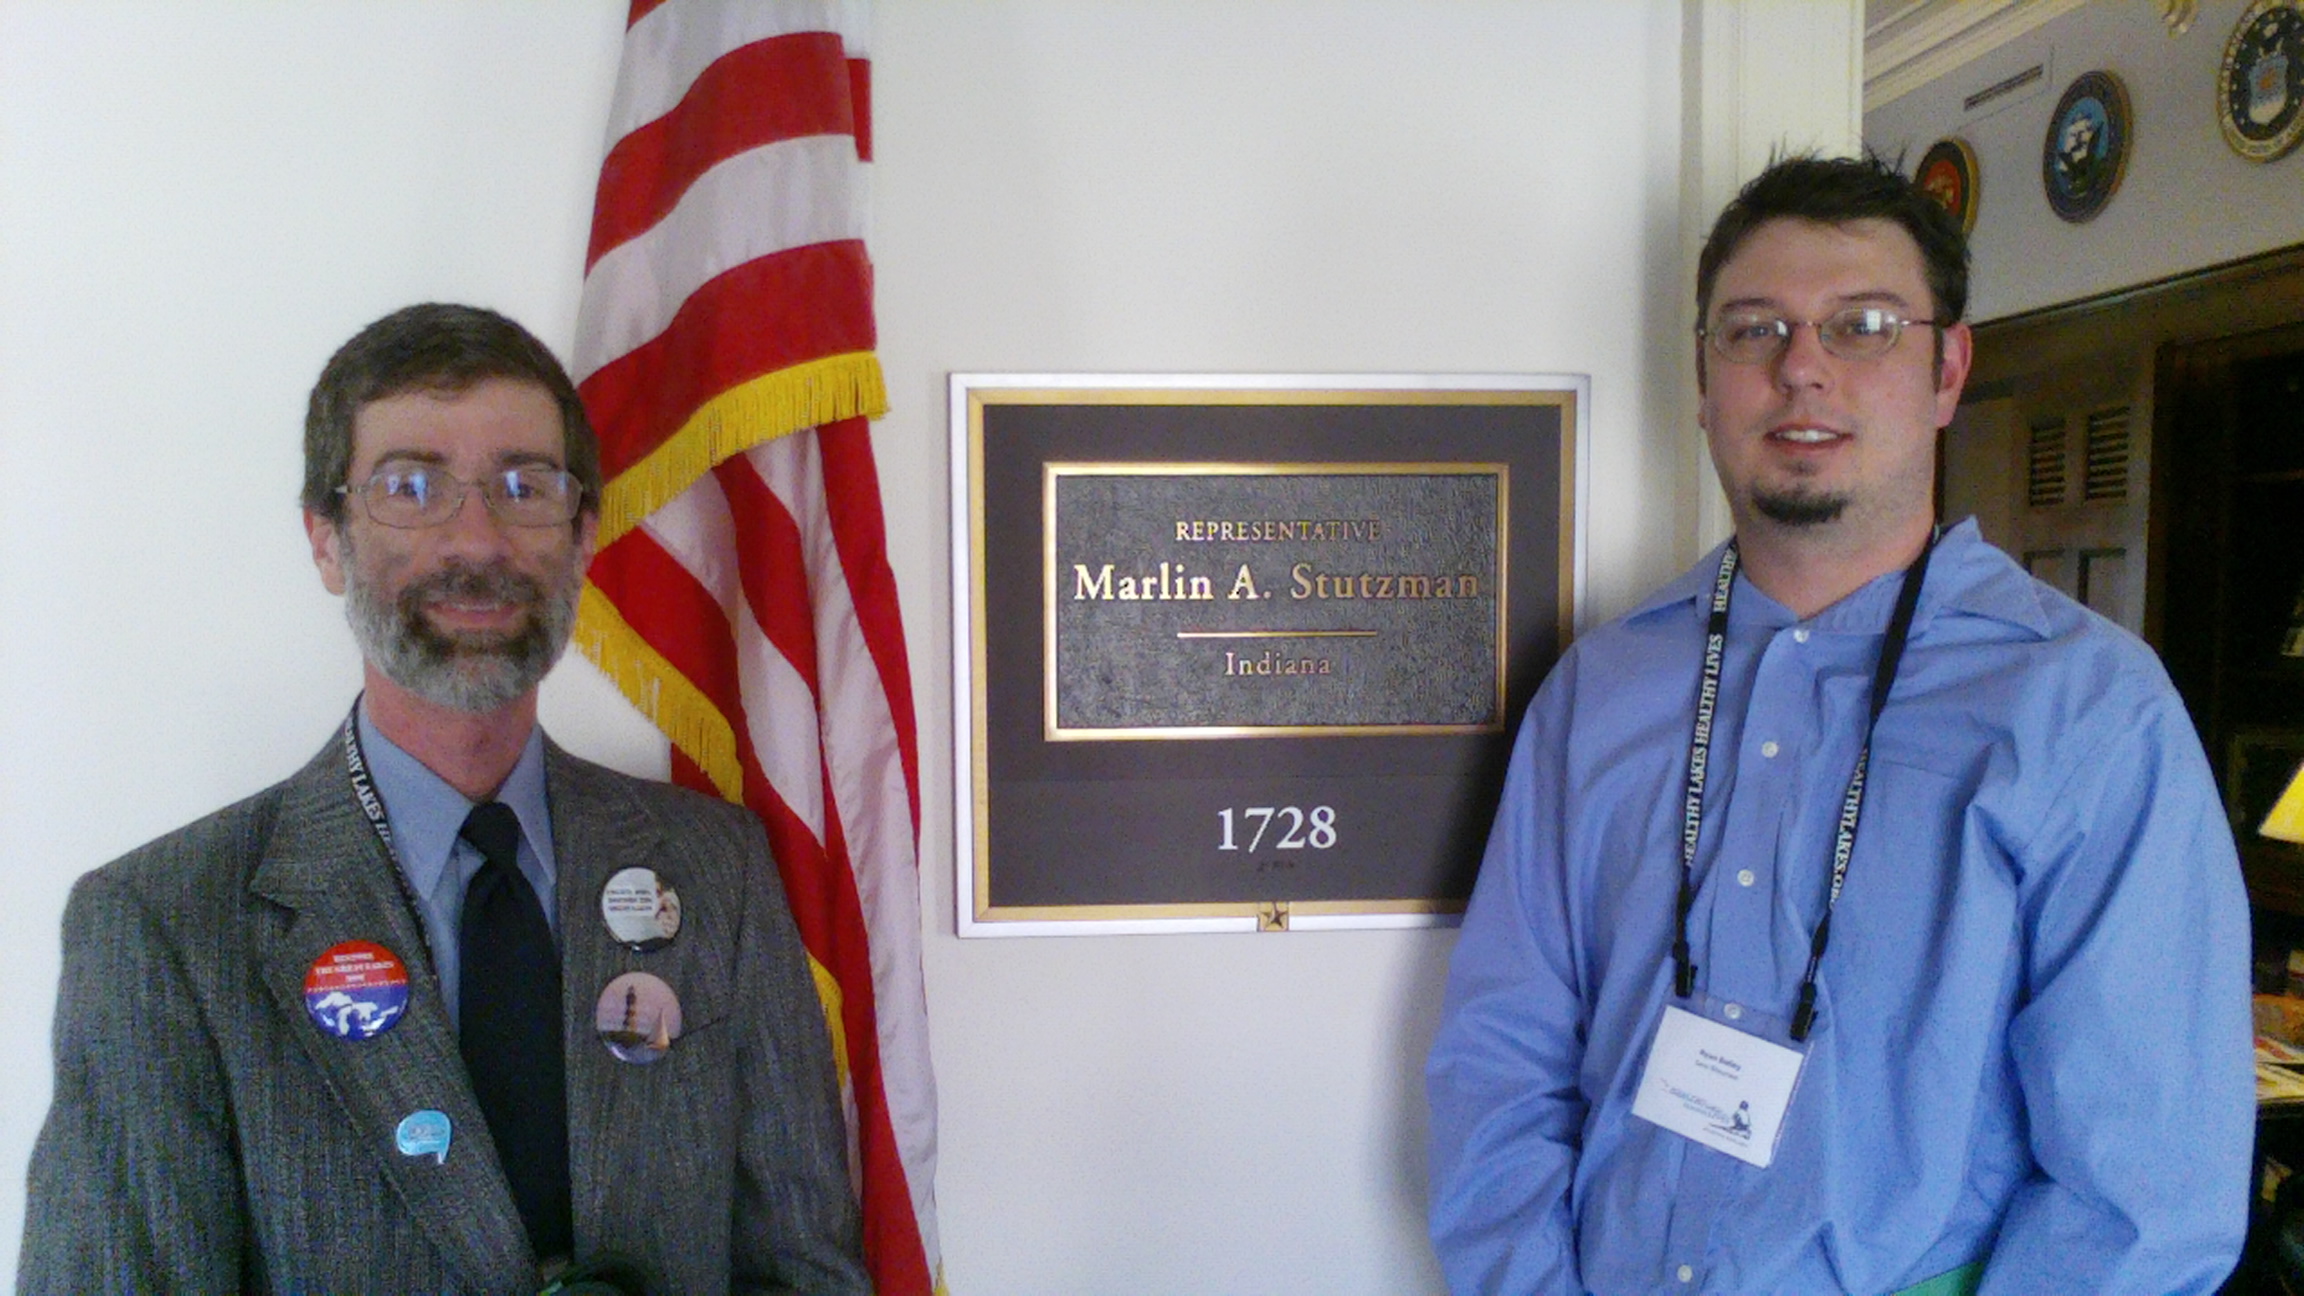 Abigail King, Bruce Allen & Ryan Bailey from Save Maumee - outside U.S. House of Representative Stutzman